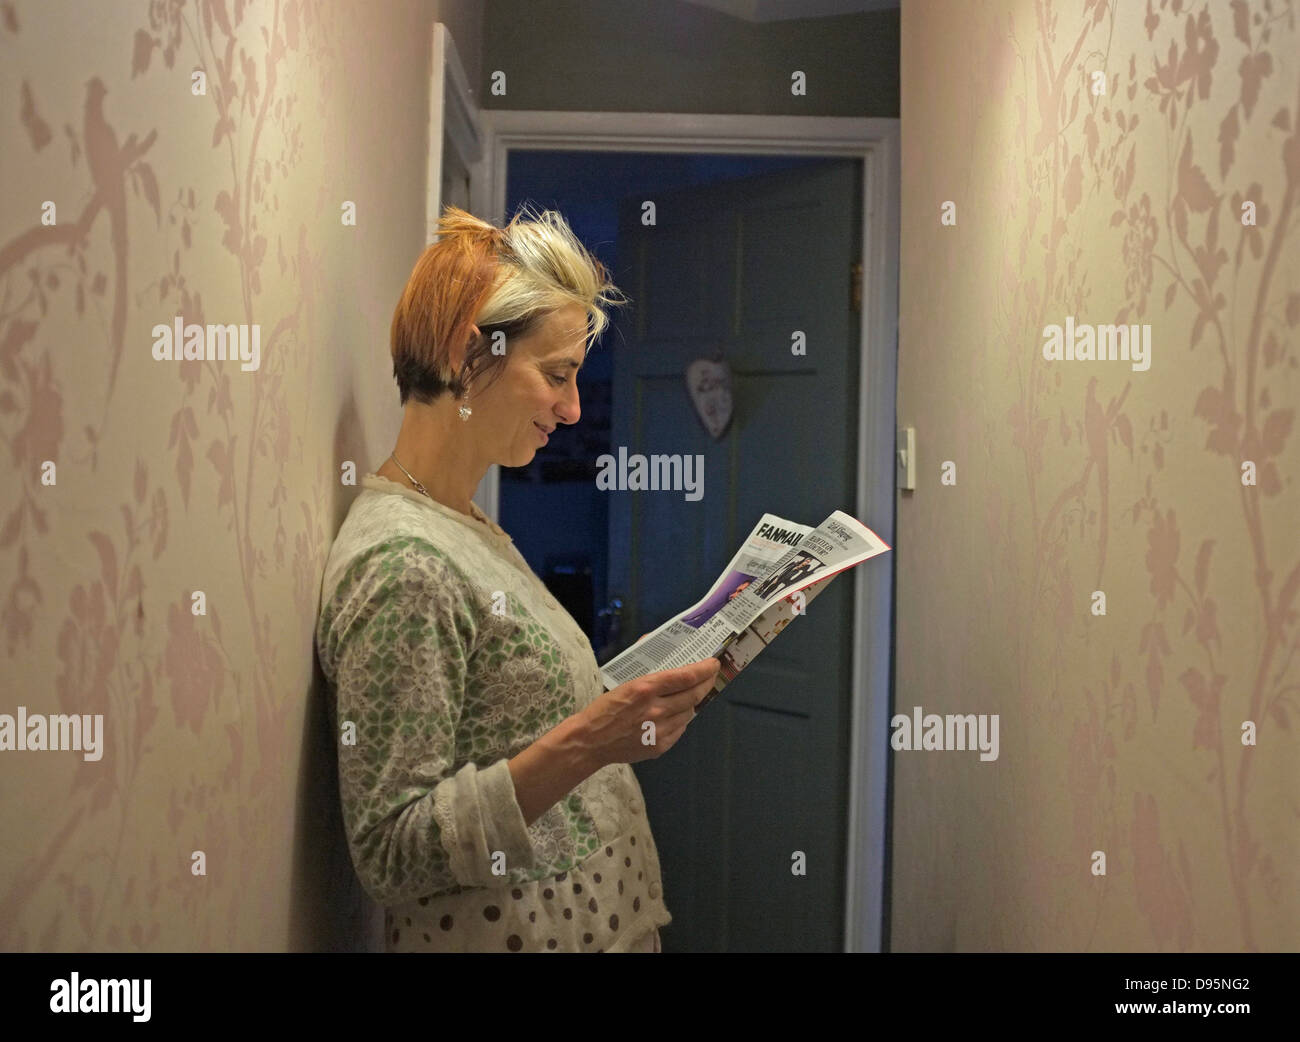 A middle-aged mother of three daughters waits outside the bathroom door. Stock Photo